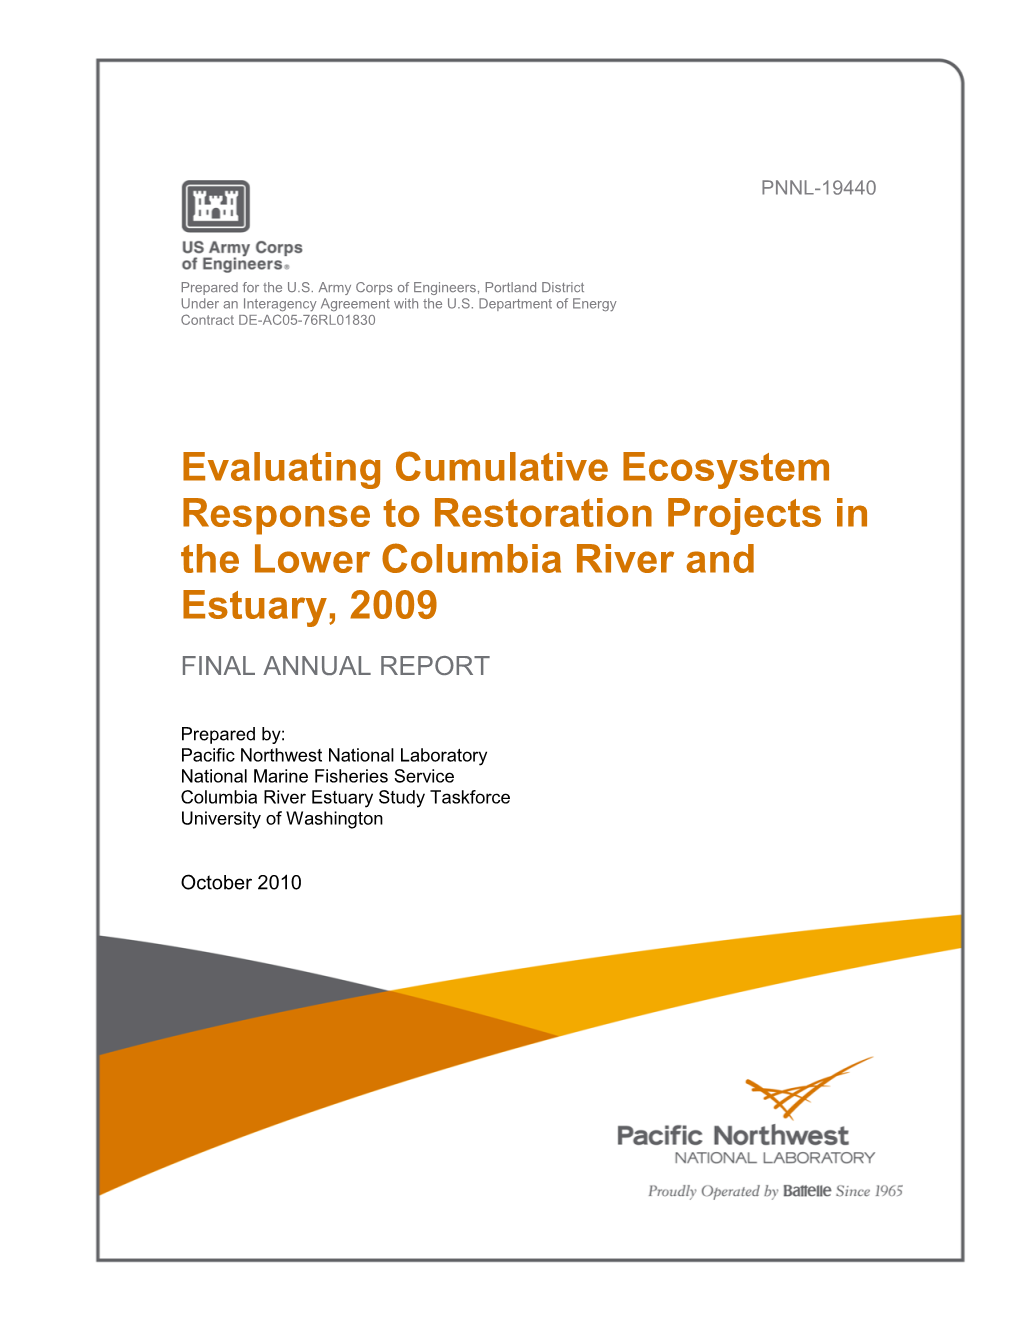 Evaluating Cumulative Ecosystem Response to Restoration Projects in the Lower Columbia River and Estuary, 2009